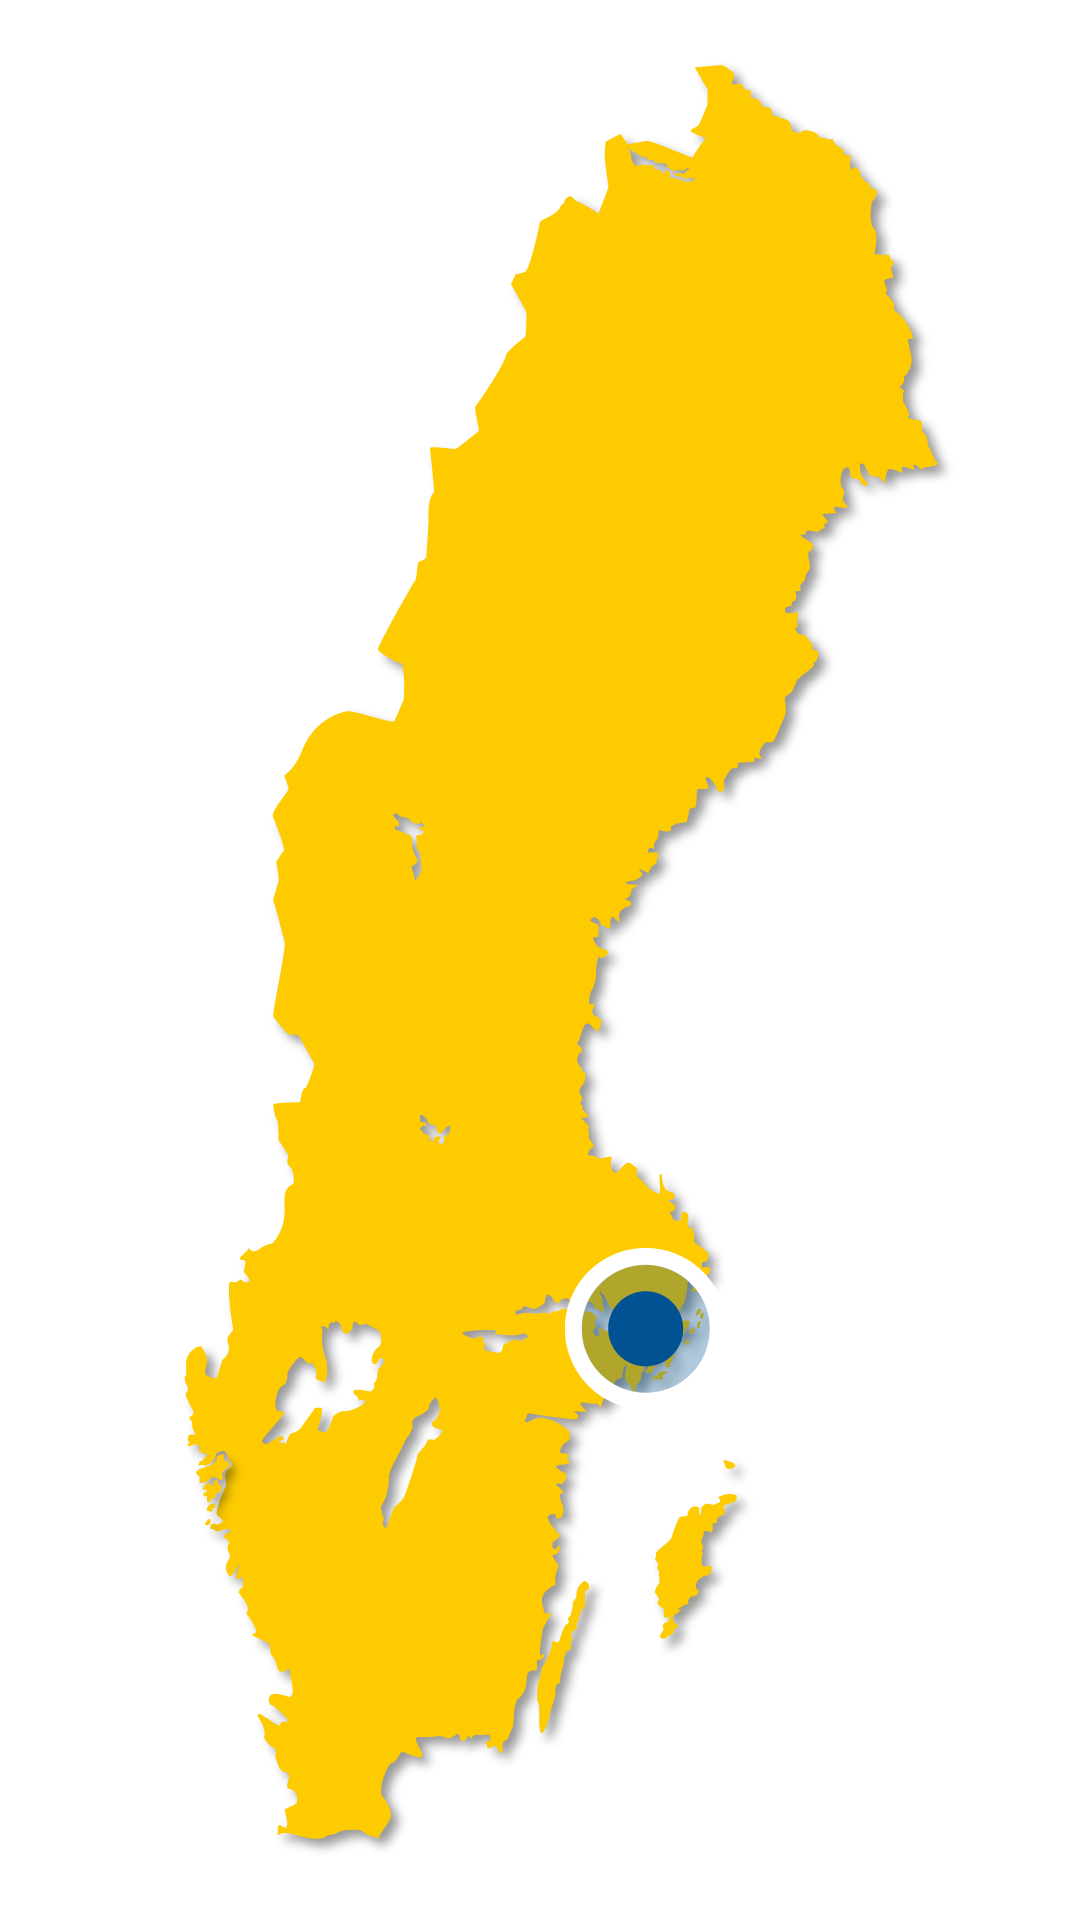 What is the Capital of Sweden?